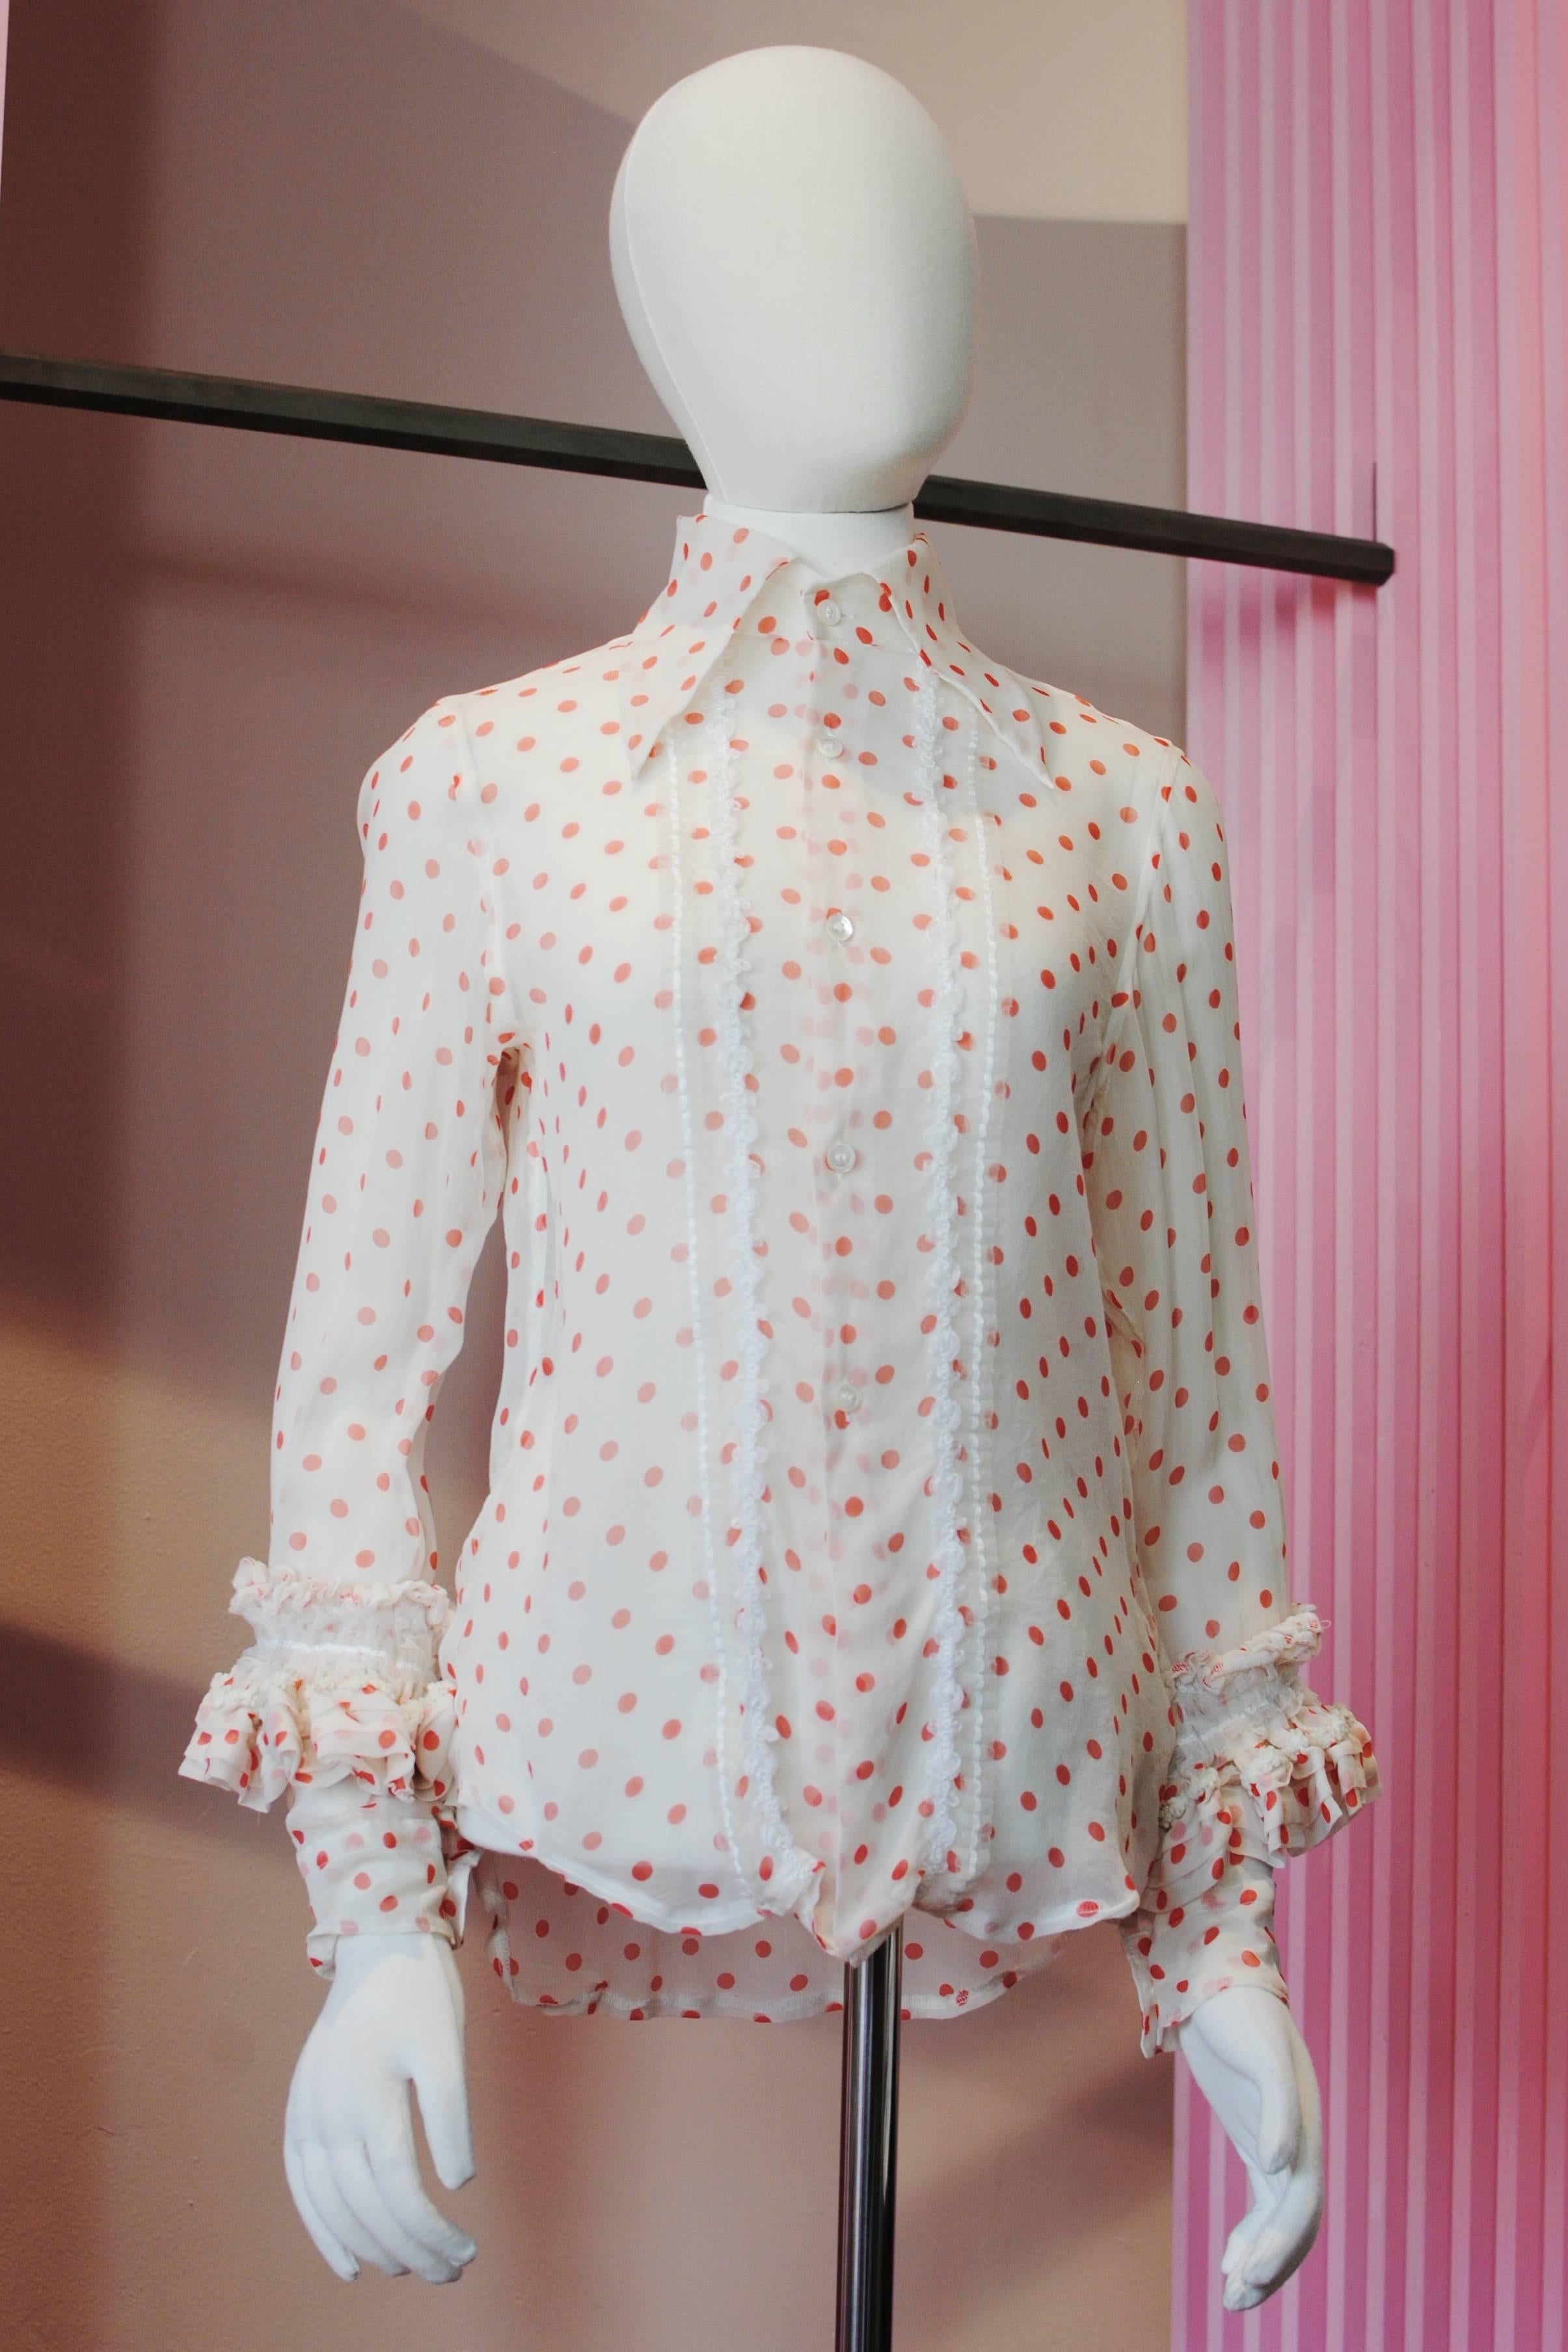 COMME des GARCONS silk polka dot shirt from the 2006 Autumn/Winter collection. It features silk crepe fabric with a red and white polka dot design. The sleeves are decorated with ornate ruffled bands.

Size — Small
Shoulder — 39 cm
Chest — 45